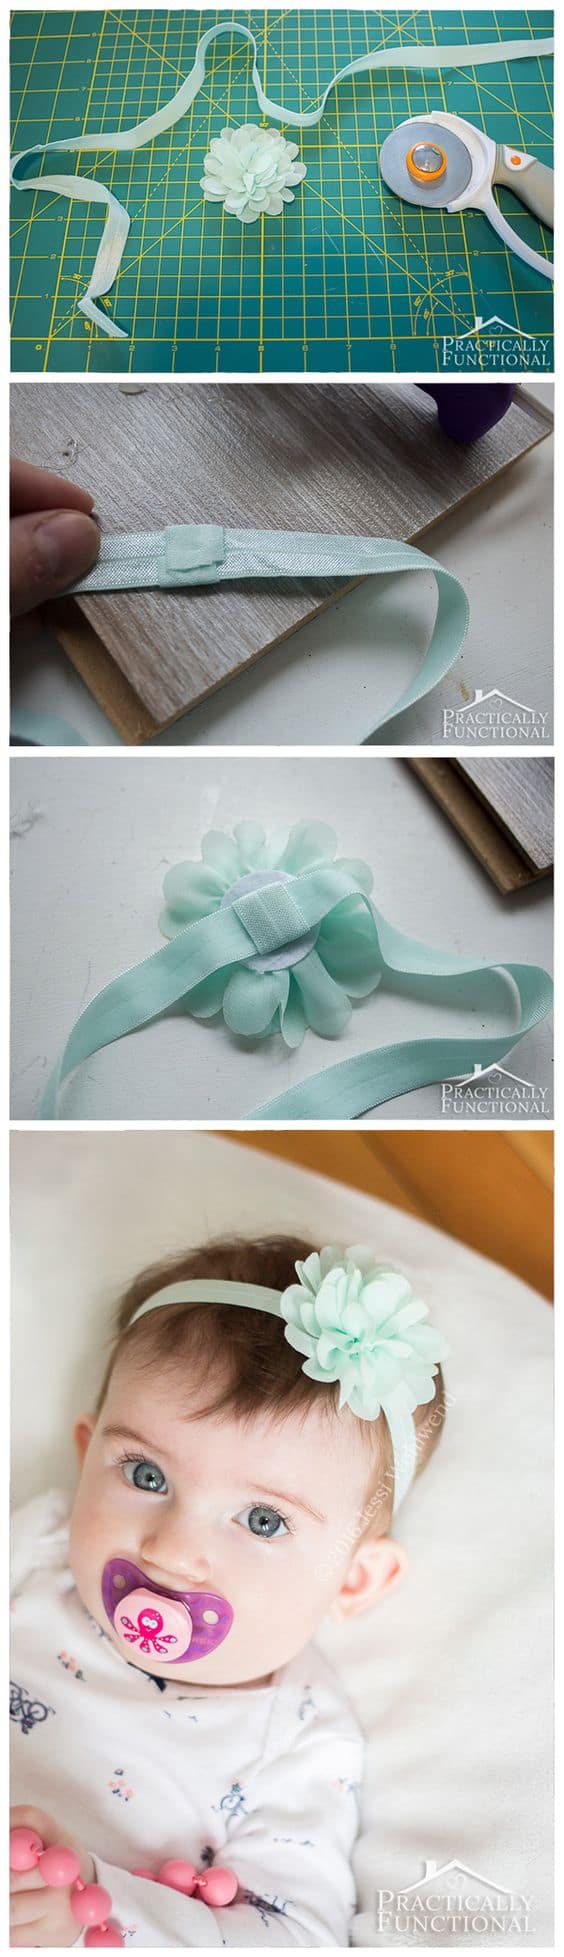 Astonishing DIY Headbands That You Can Make With Ease